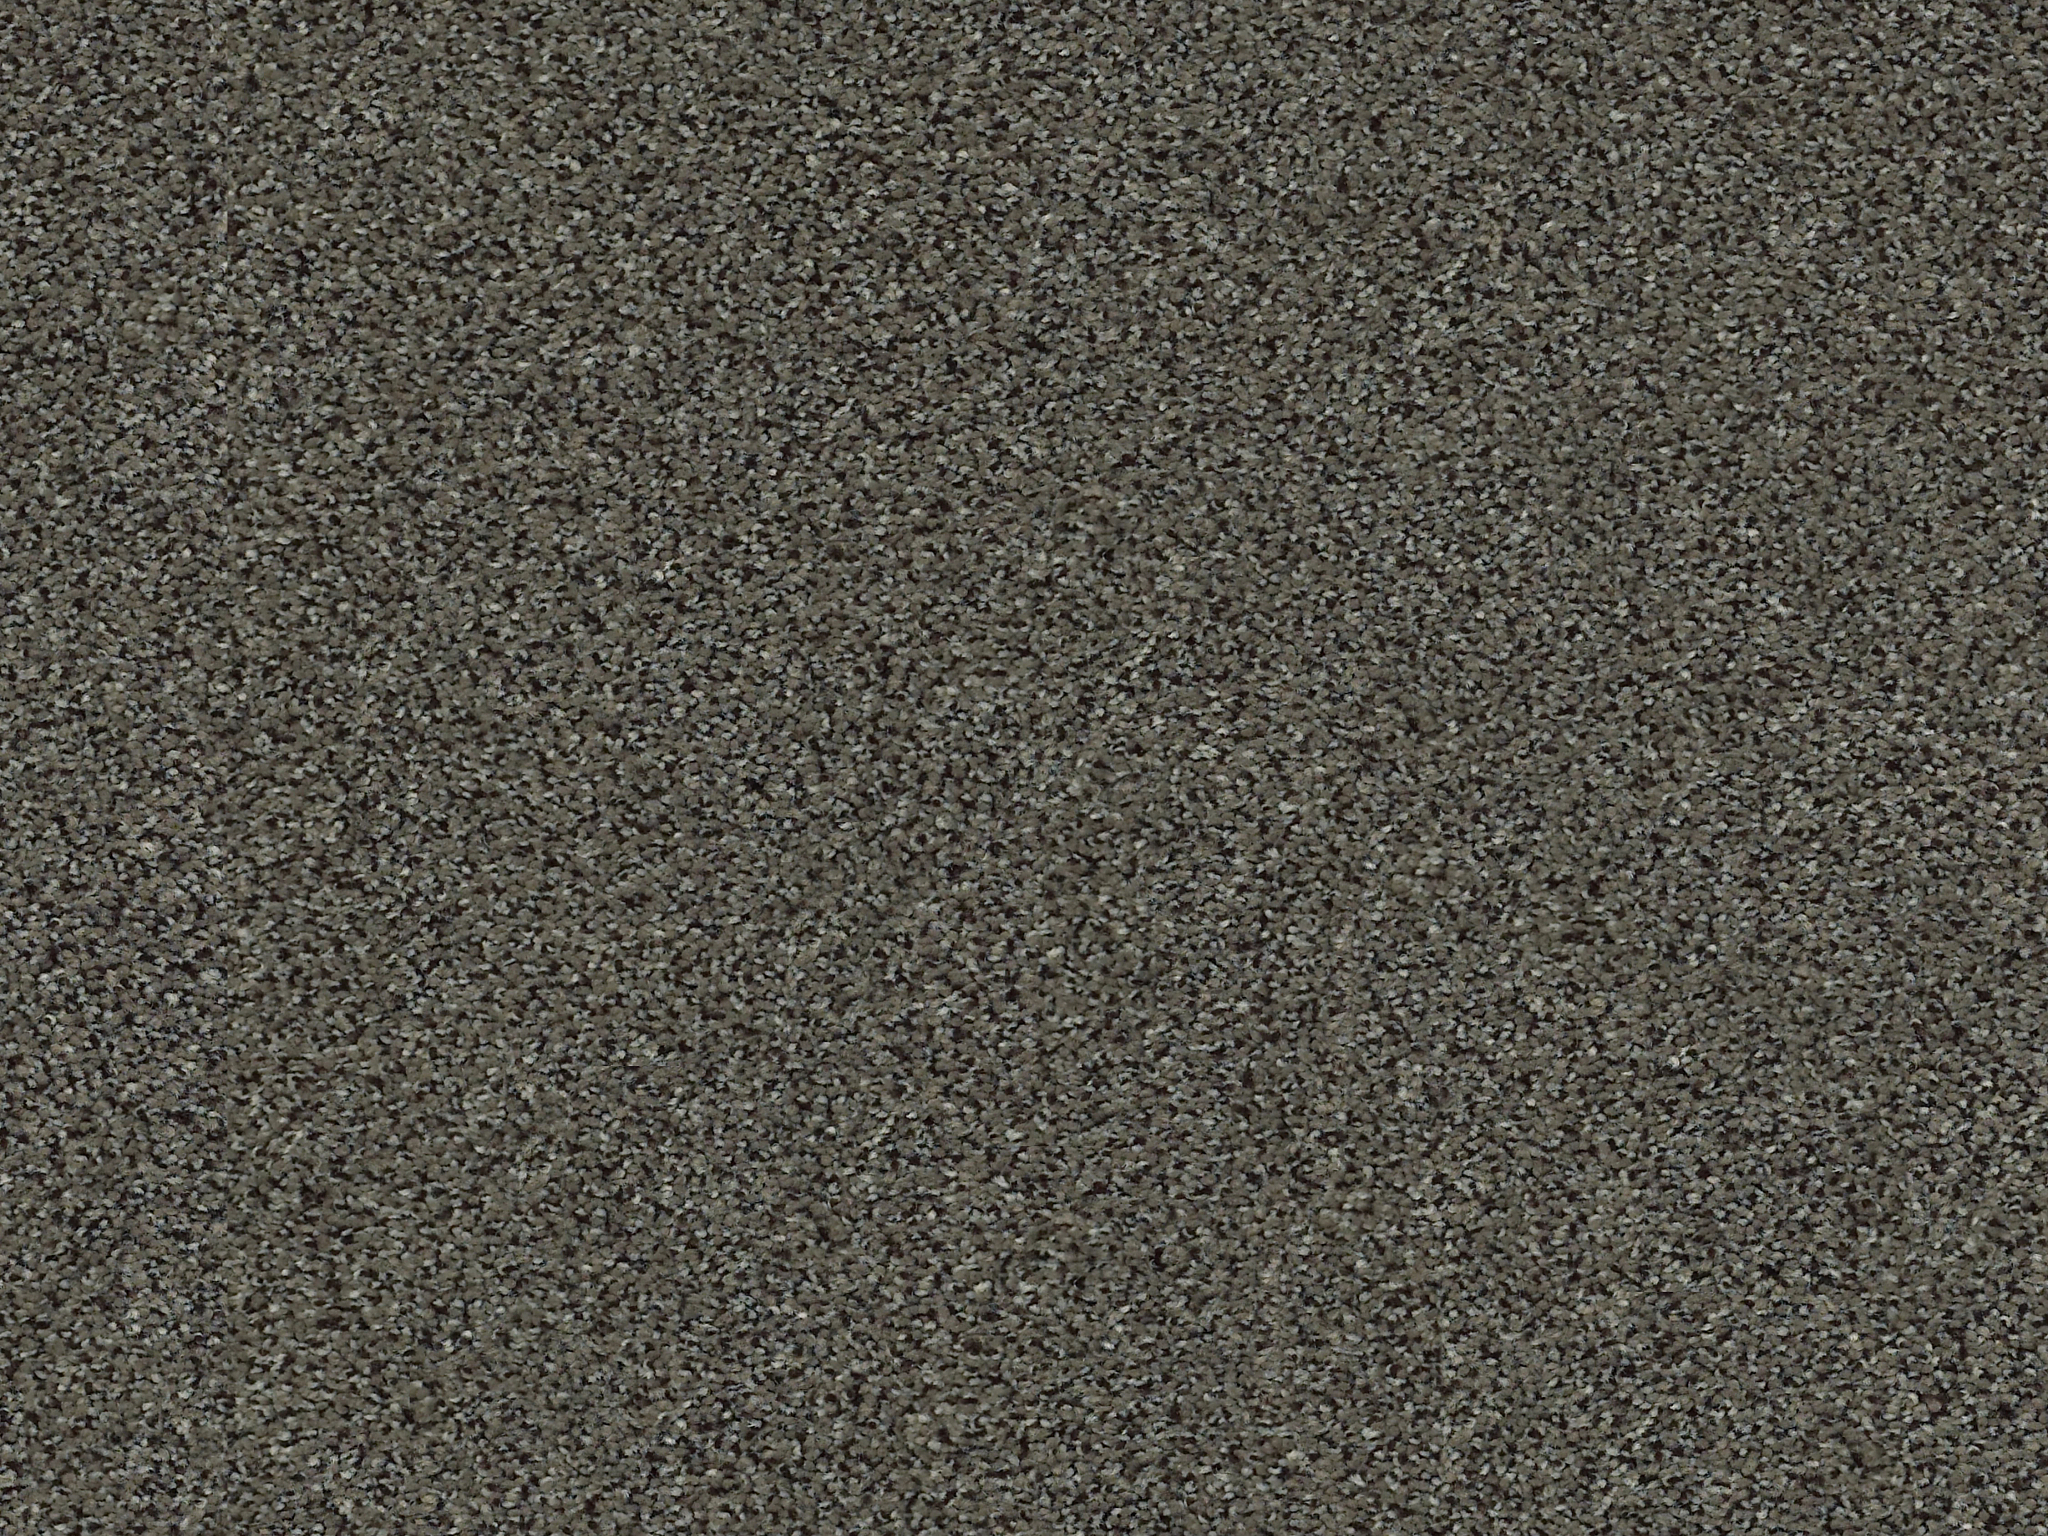 Serenity Cove Carpet - Aluminum Zoomed Swatch Thumbnail